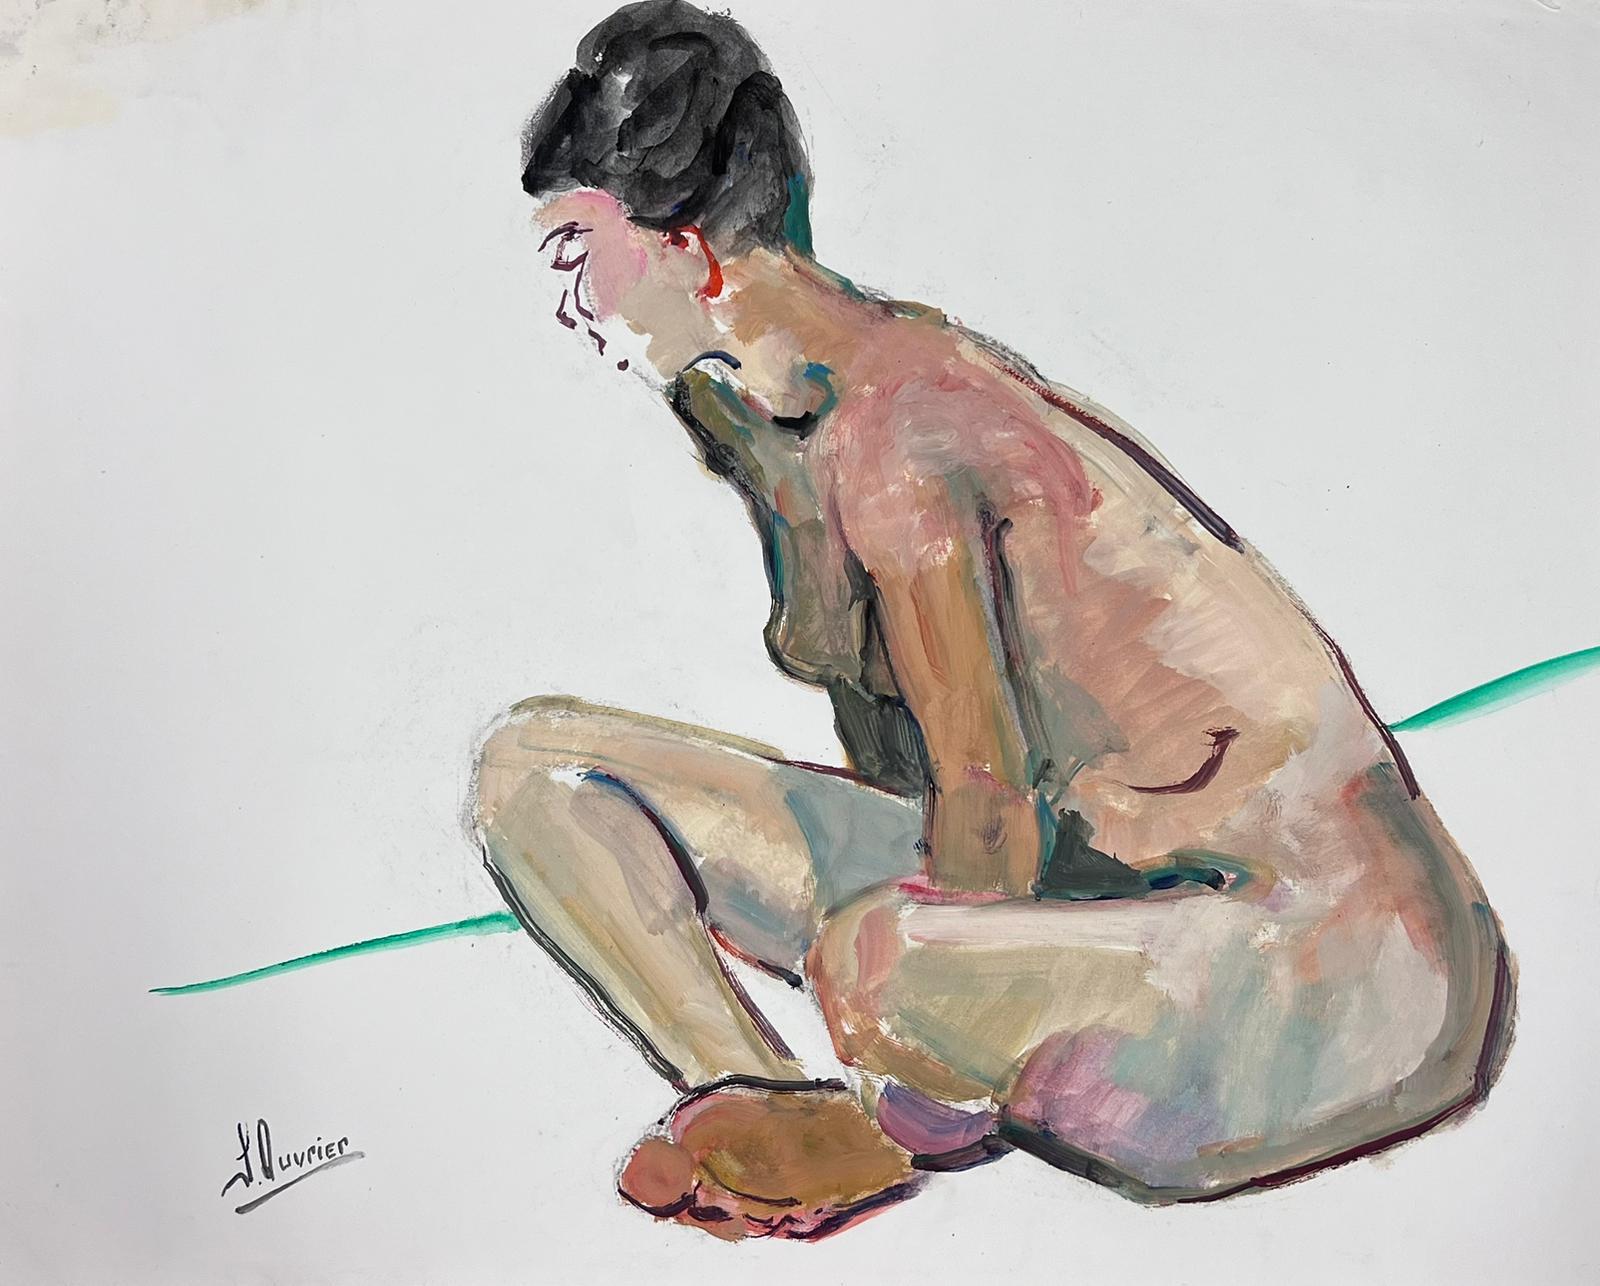 The Artists Model
Nude Lady Model
French School, circa 1970's  
signed oil painting on card, unframed
size: 19.5 x 24 inches
condition: overall very good, a very few light markings to the surface but nothing detrimental to the appeal and appearance